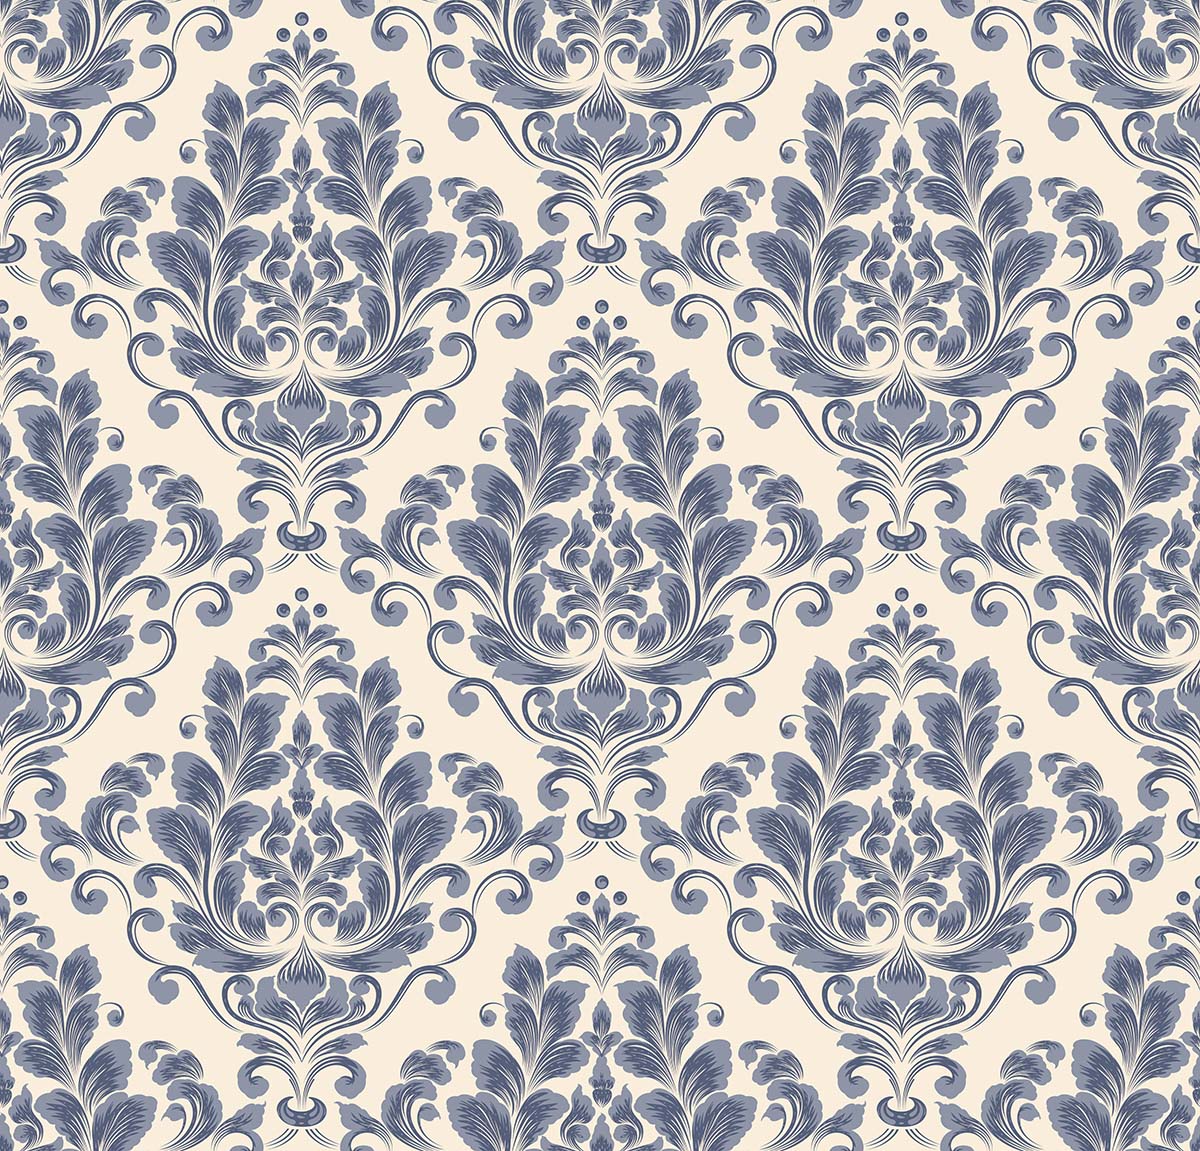 A wallpaper with blue and white floral designs